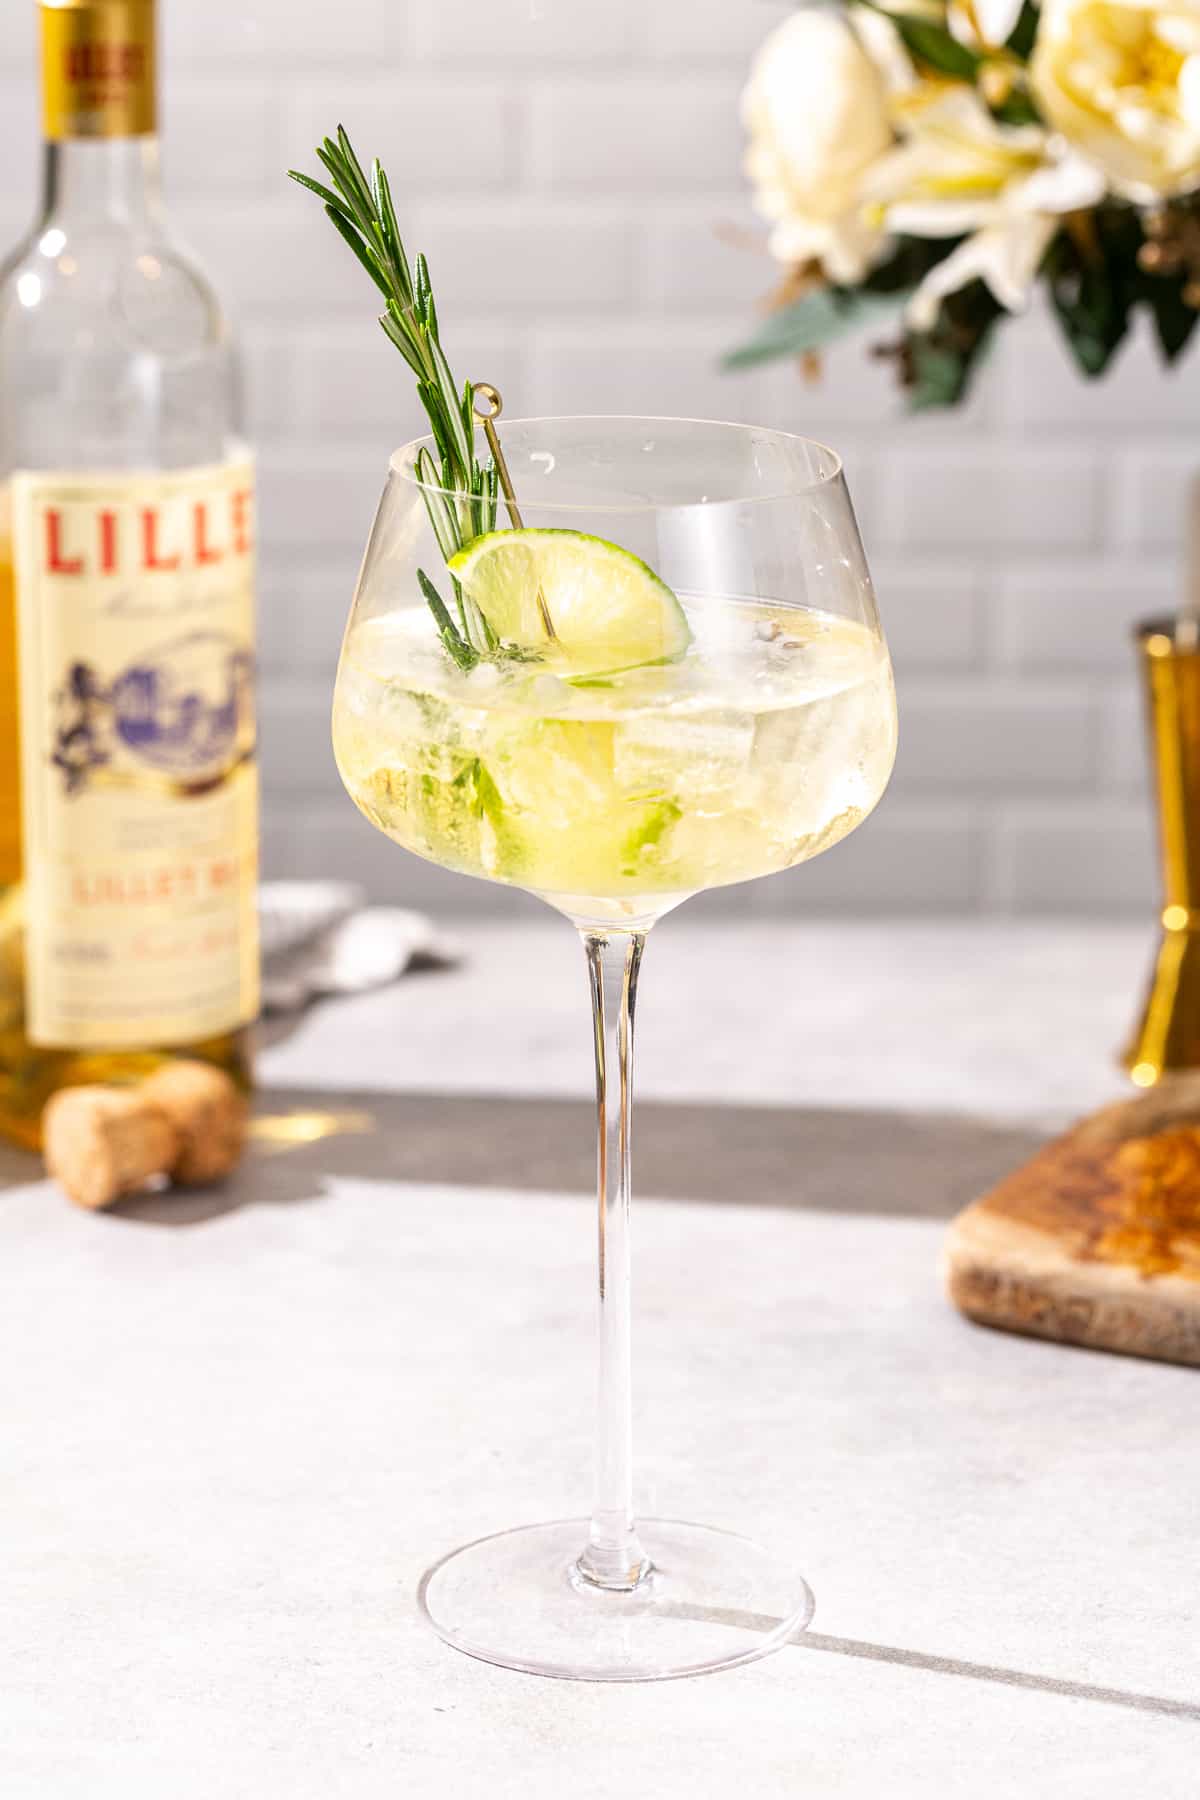 Side view of the LIllet Spritz cocktail in a tall stemmed glass. A lime slice and fresh rosemary garnish the drink. In the background are a bottle of Lillet Blanc, a prosecco cork and bar tools.